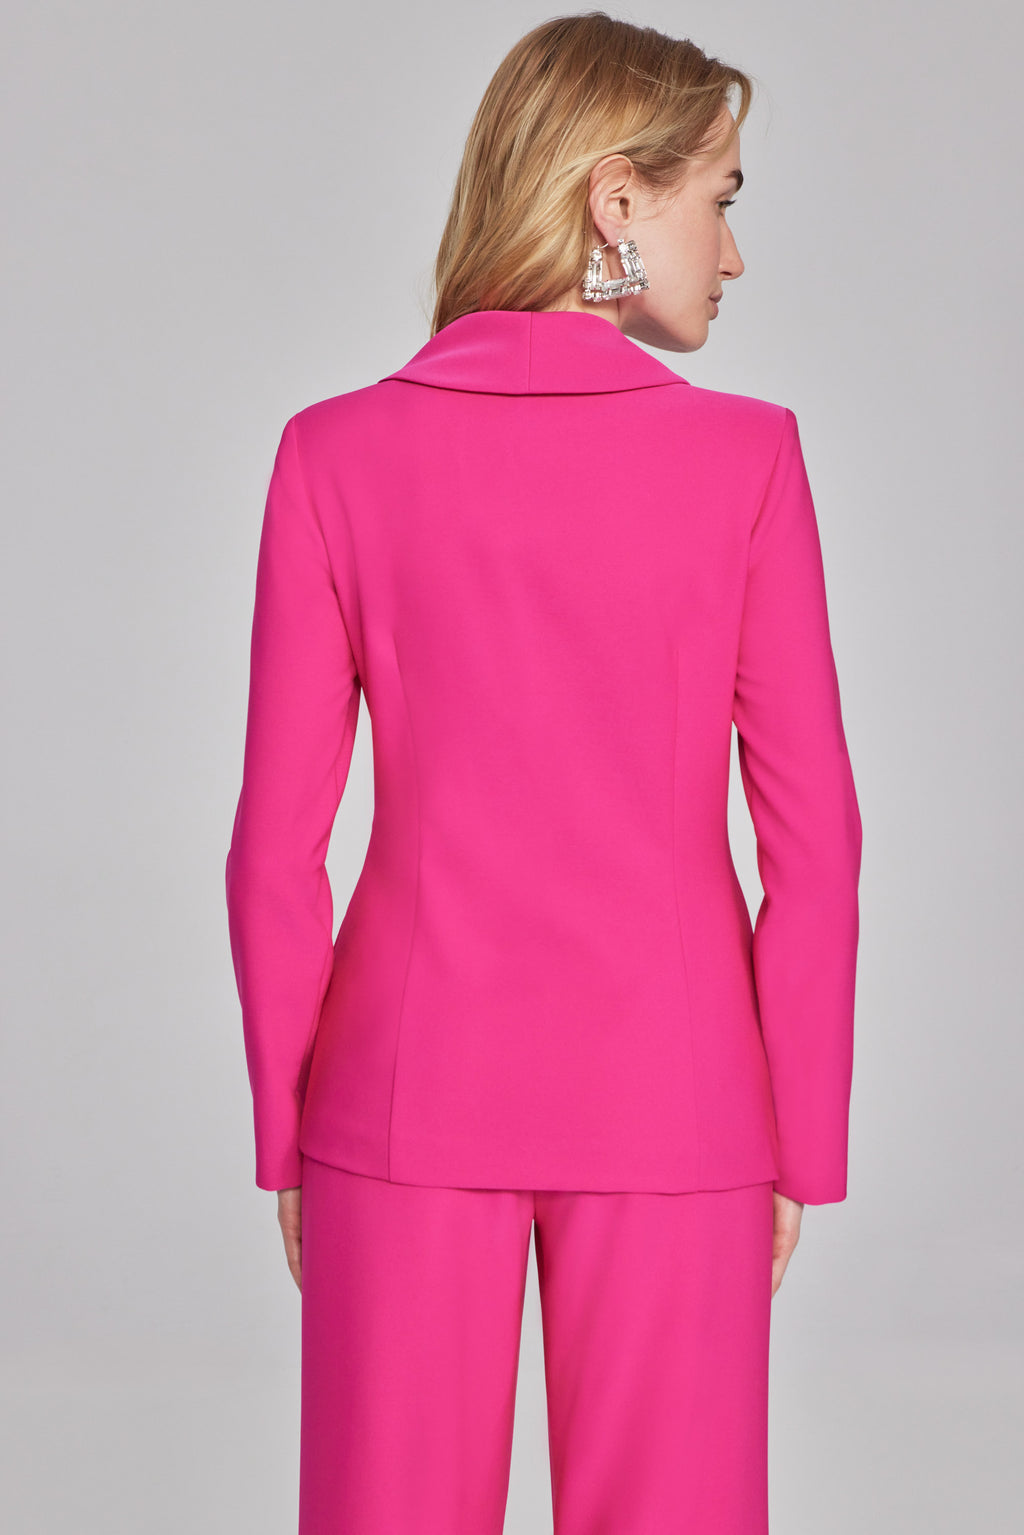 Joseph Ribkoff Shocking Pink Fitted Blazer with Ornament Closure Style 241737